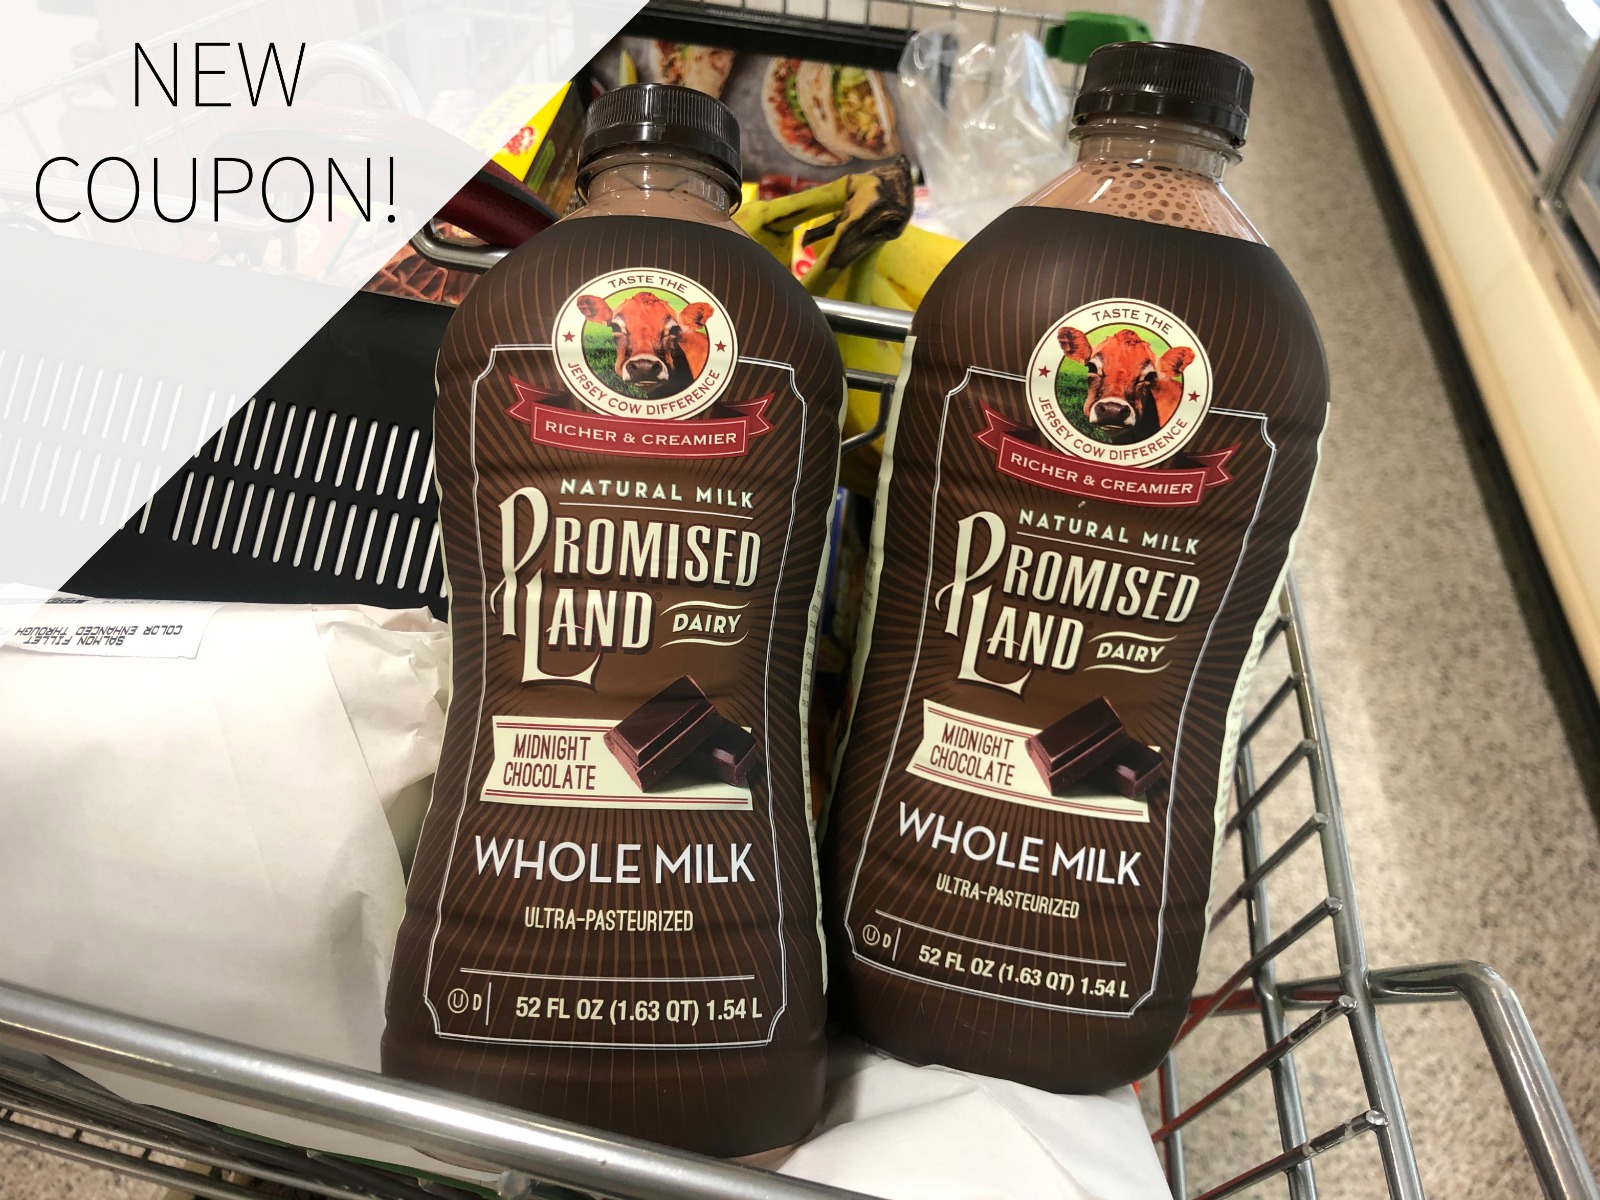 New Promised Land Milk Coupon – Save $2 At Publix!